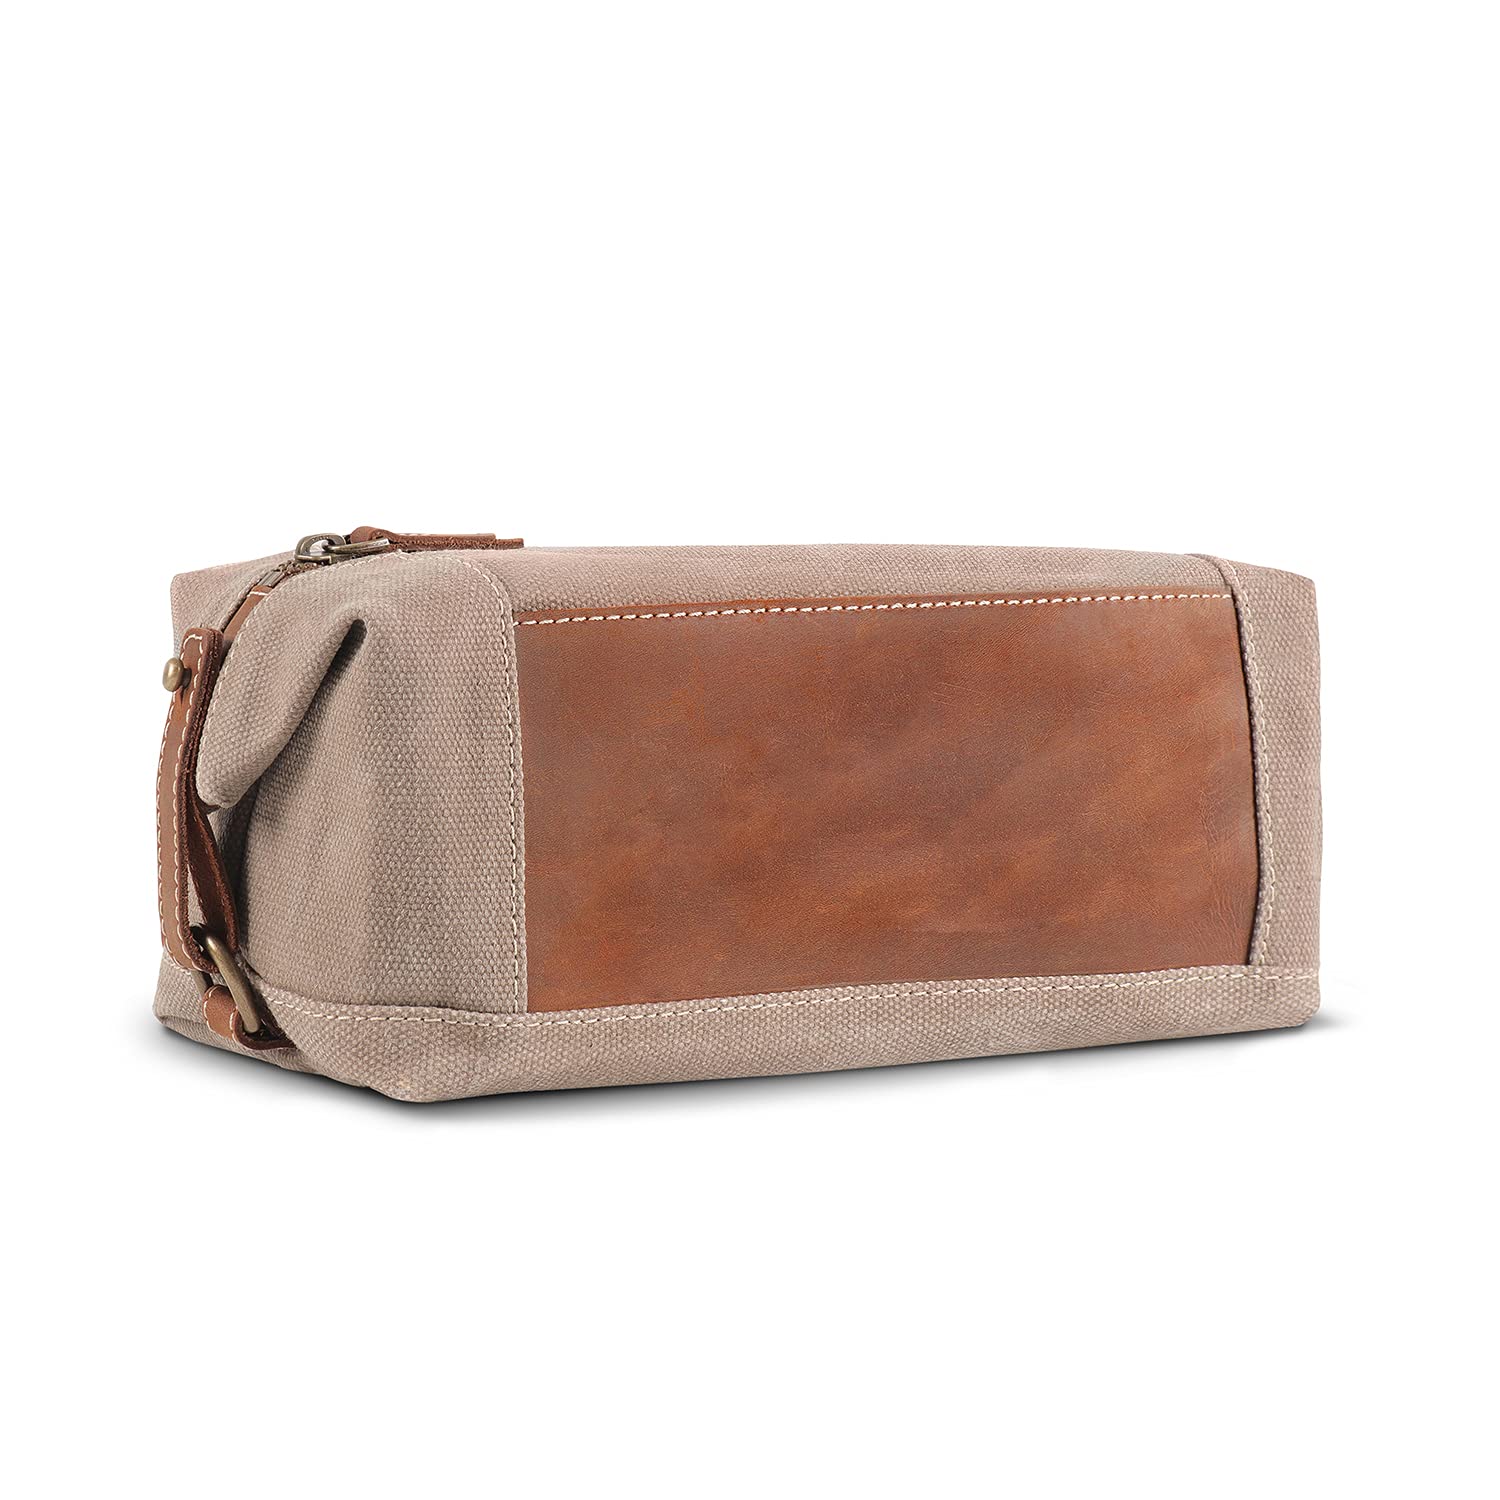 Londo Toiletry Bag Genuine Leather and Canvas Travel Toiletry Bag Dopp Kit - Unisex - Camel